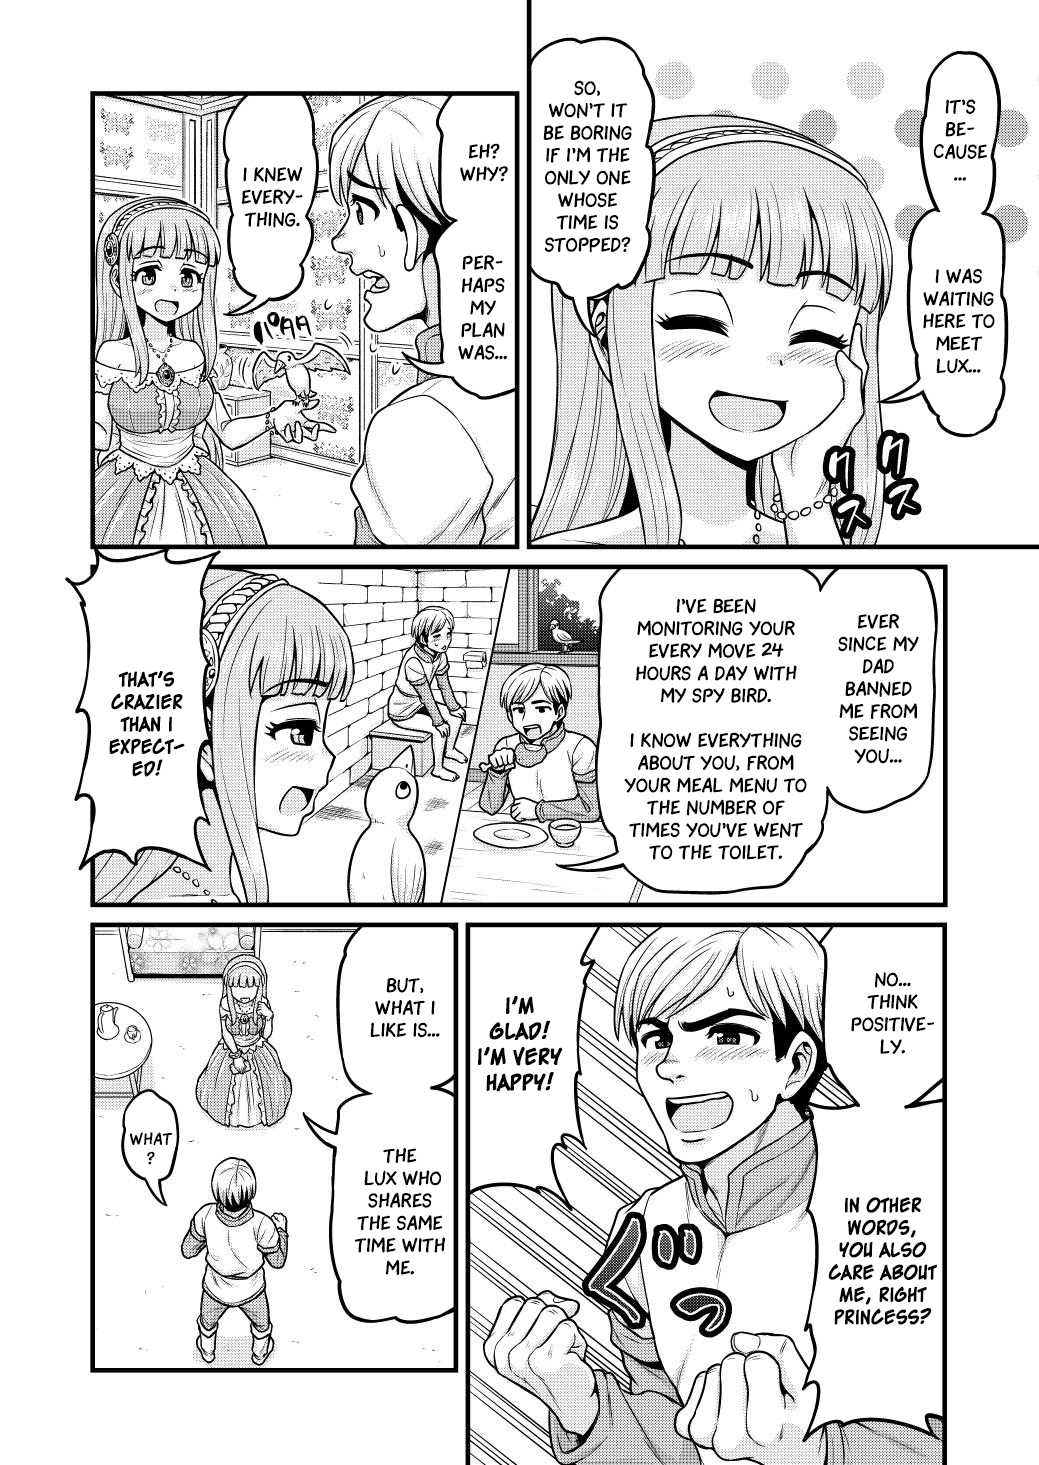 Filming Adult Videos in Another World - Chapter 2 Page 27